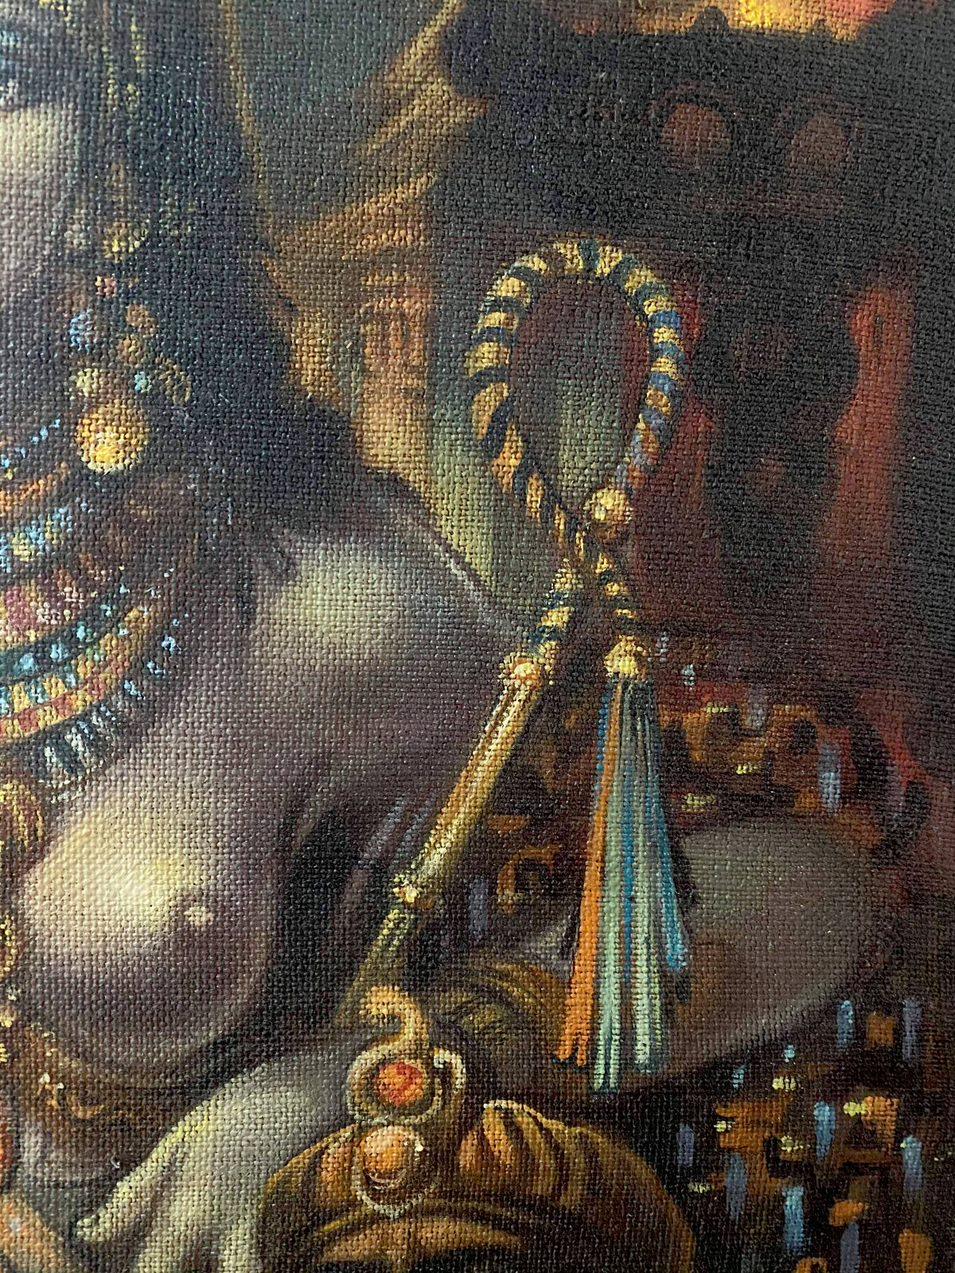 Cleopatra, Classic art, Original oil Painting, Ready to Hang - Black Figurative Painting by Alexander Litvinov